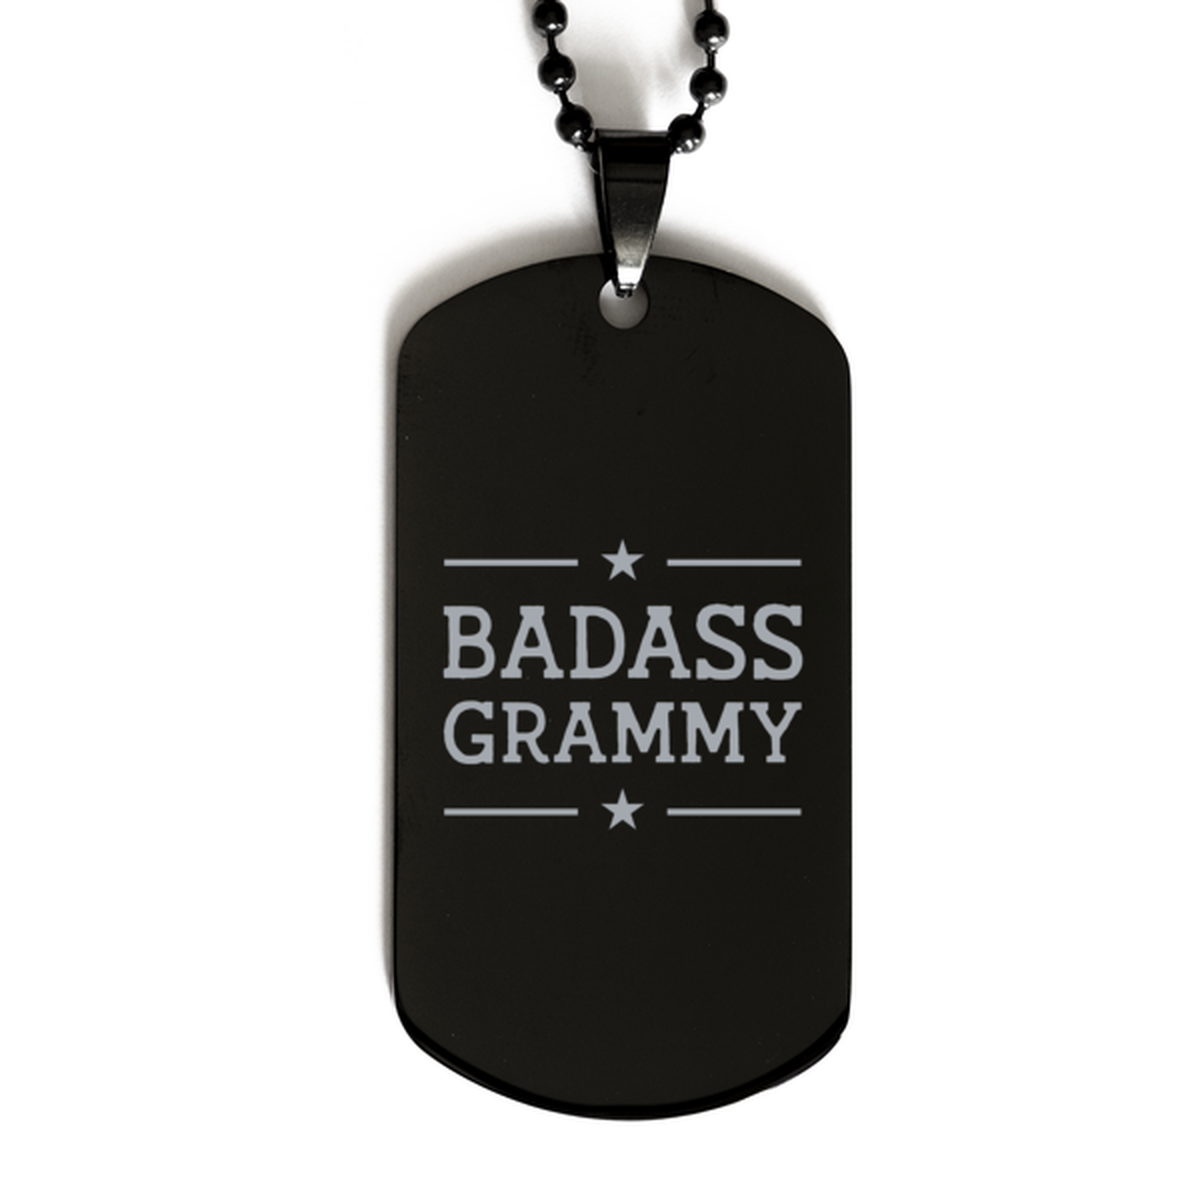 Grammy Black Dog Tag, Badass Grammy, Funny Family Gifts  Necklace For Grammy From Granddaughter Grandson